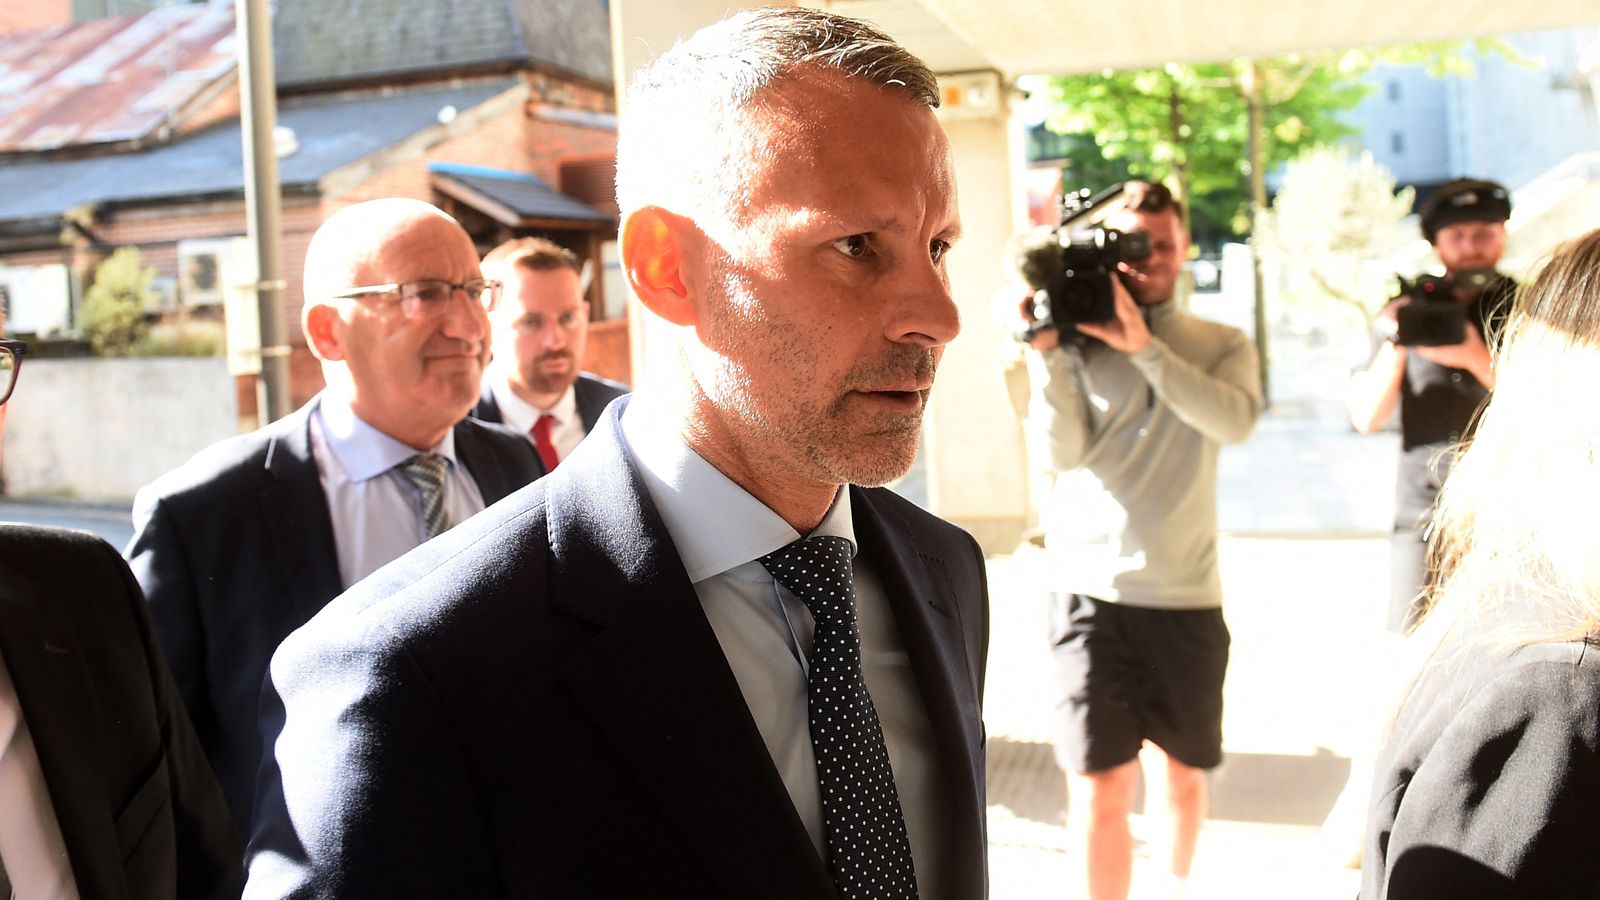 ryan-giggs-trial-live-kate-greville-back-in-witness-box-behind-screen-after-suggestion-she-told-friend-bruising-was-caused-by-rough-sex